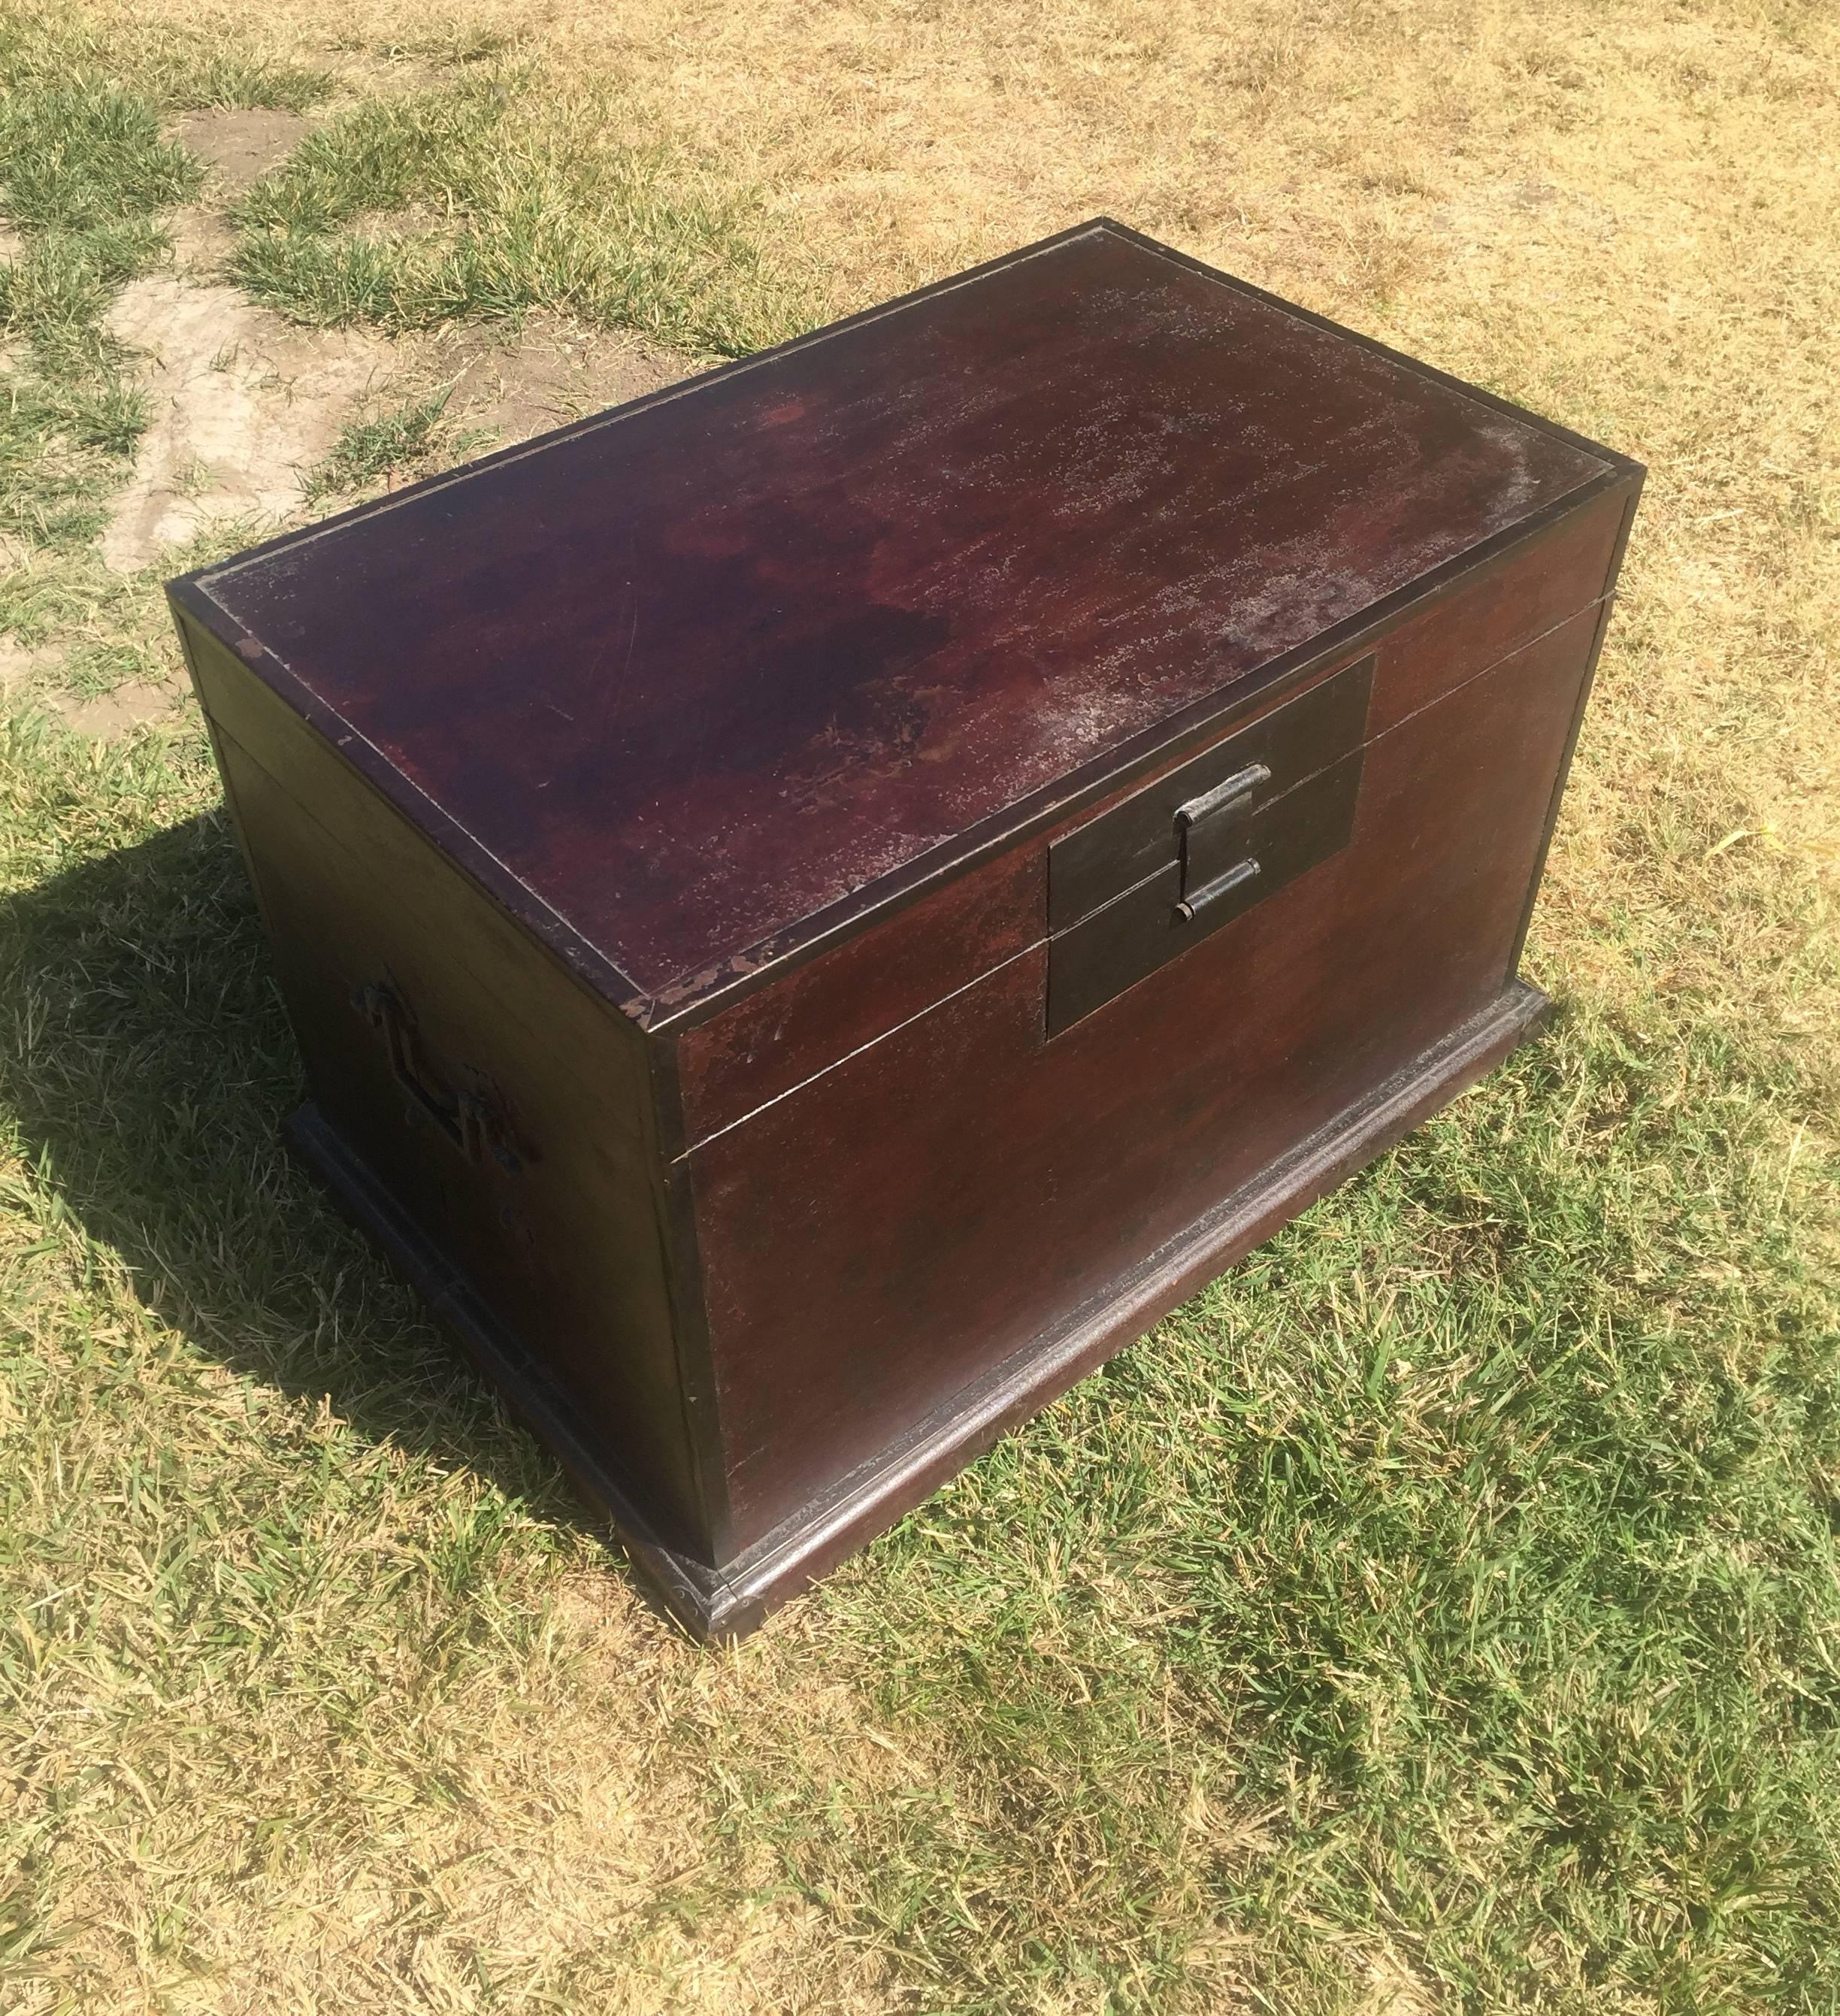 This beautiful trunk is all original, with gorgeous reddish interior and custom northern style bronze hardware. Reinforced base and corners. Superb original top and exterior display amazing crackled patina. 

Fantastic as a coffee table or at foot